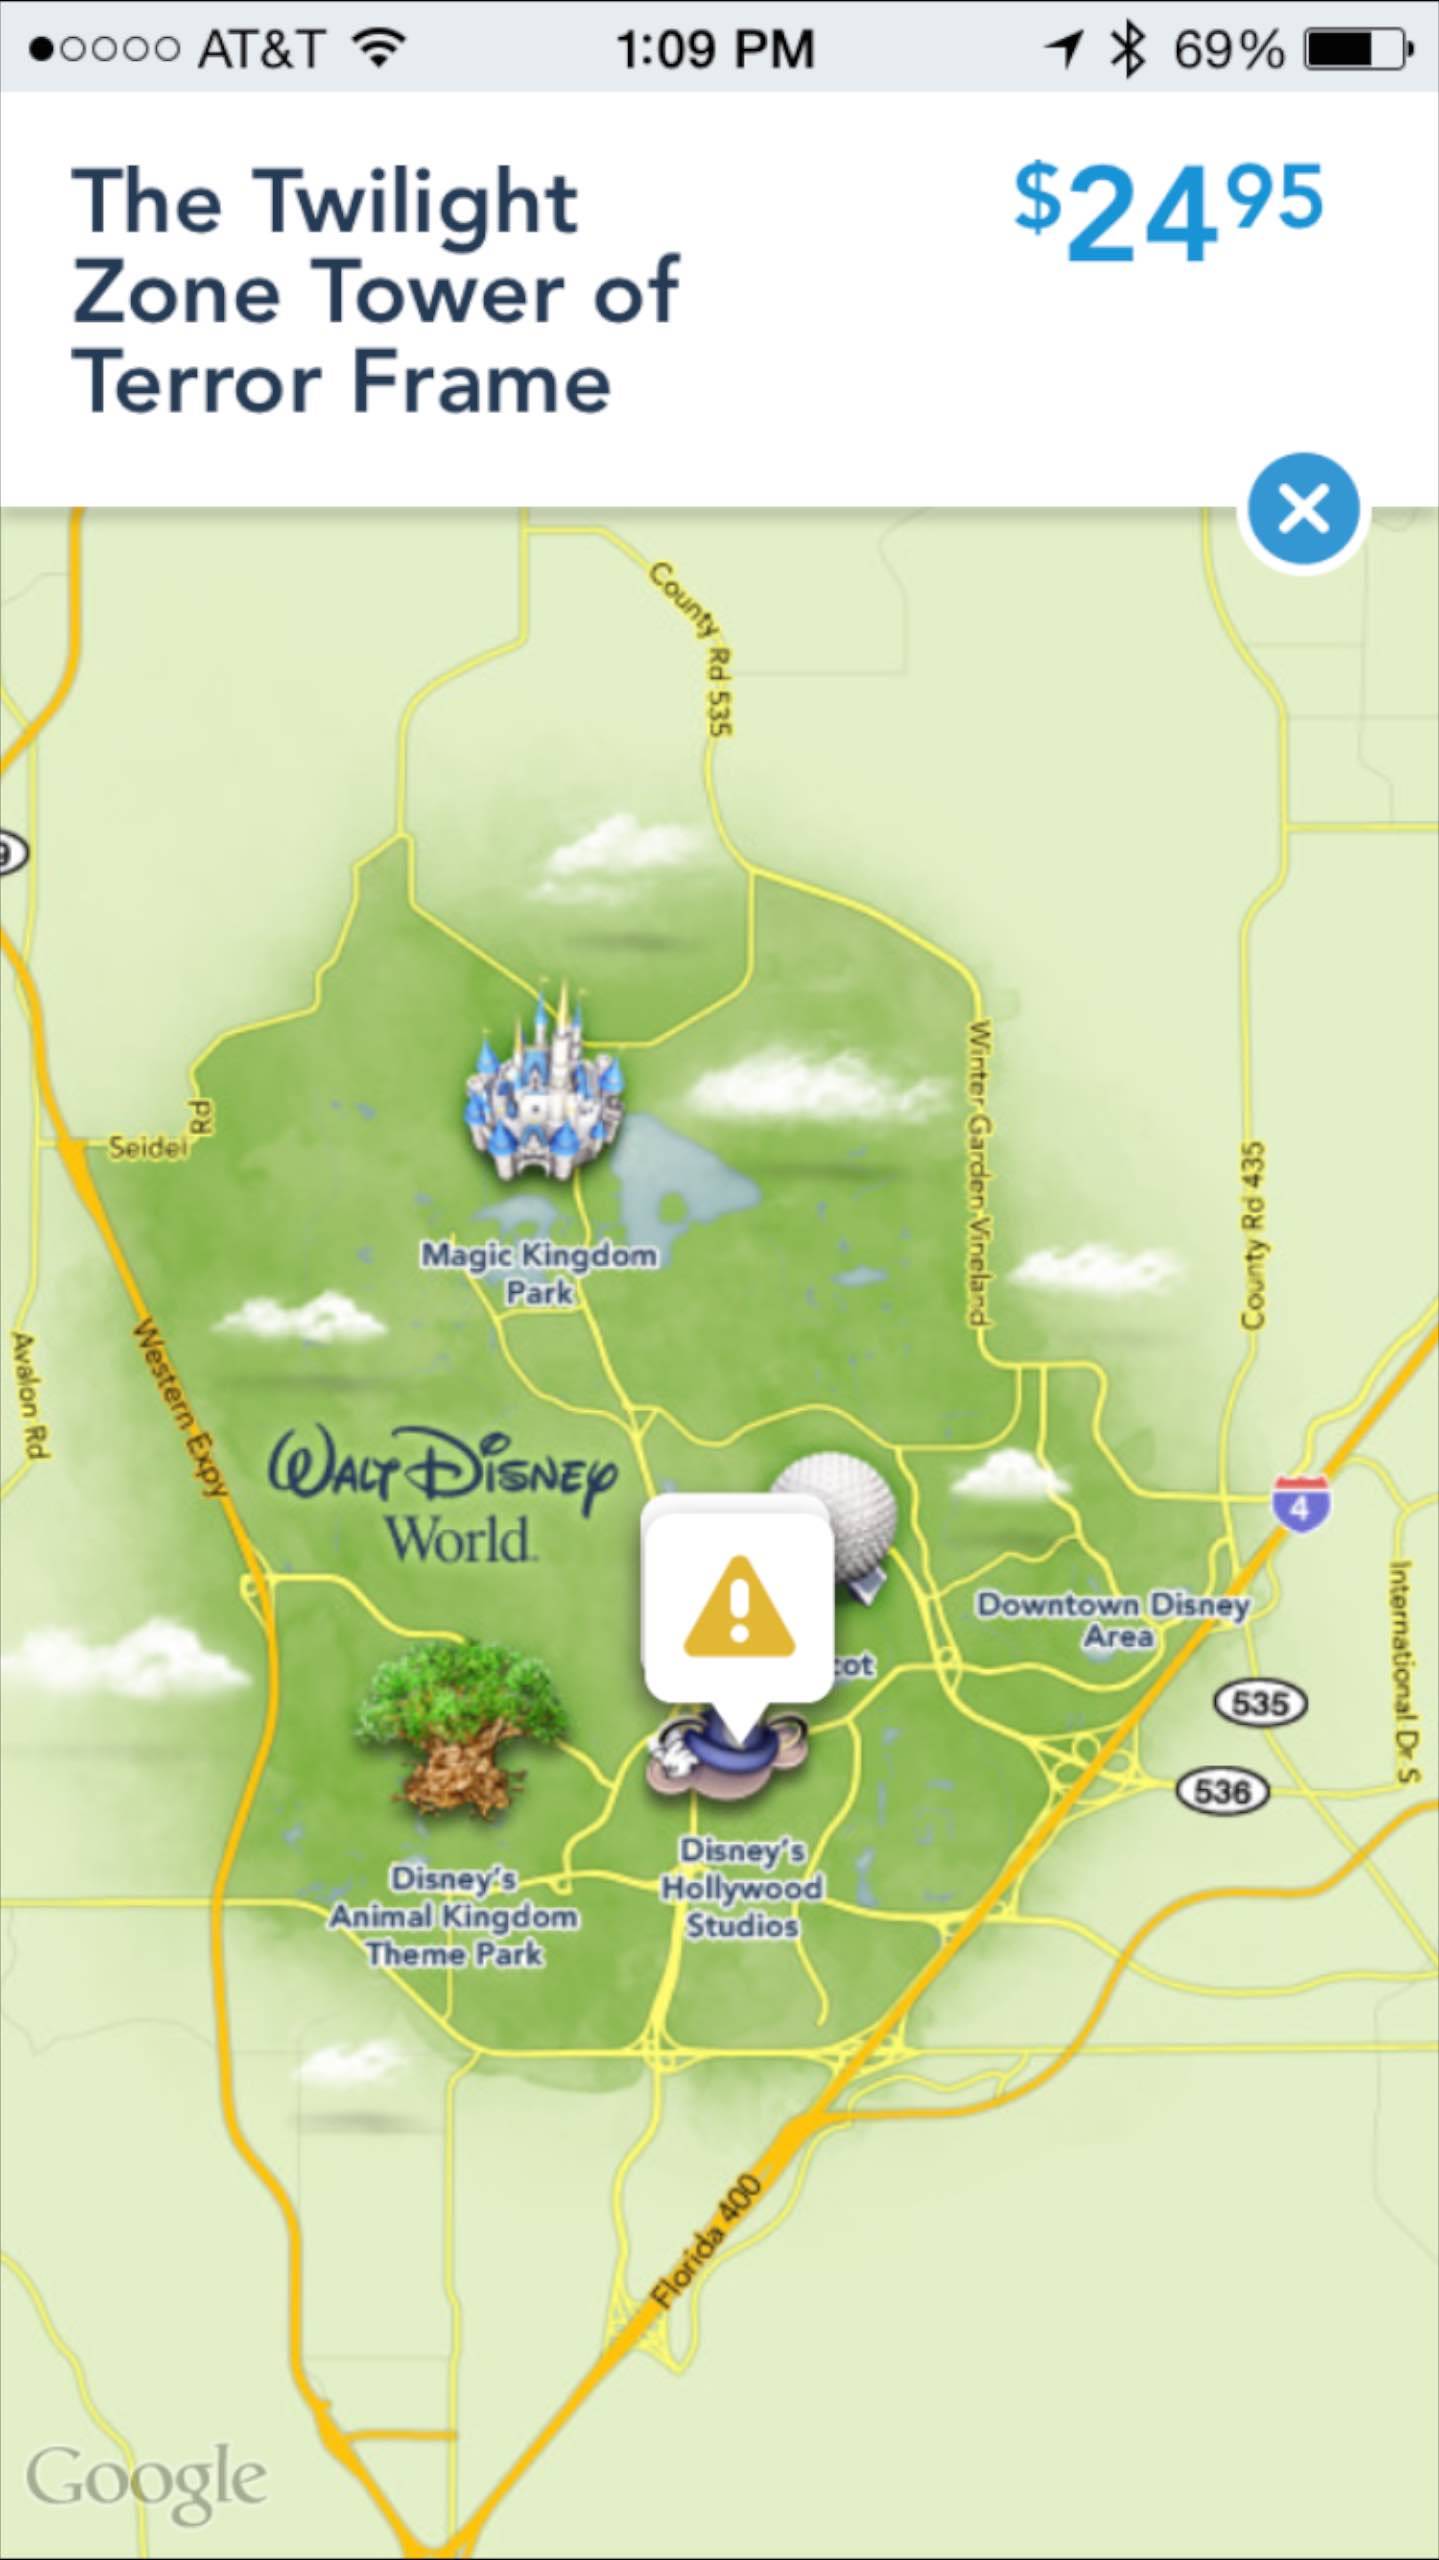 Shop Disney Parks app - Location of selected Tower of Terror item